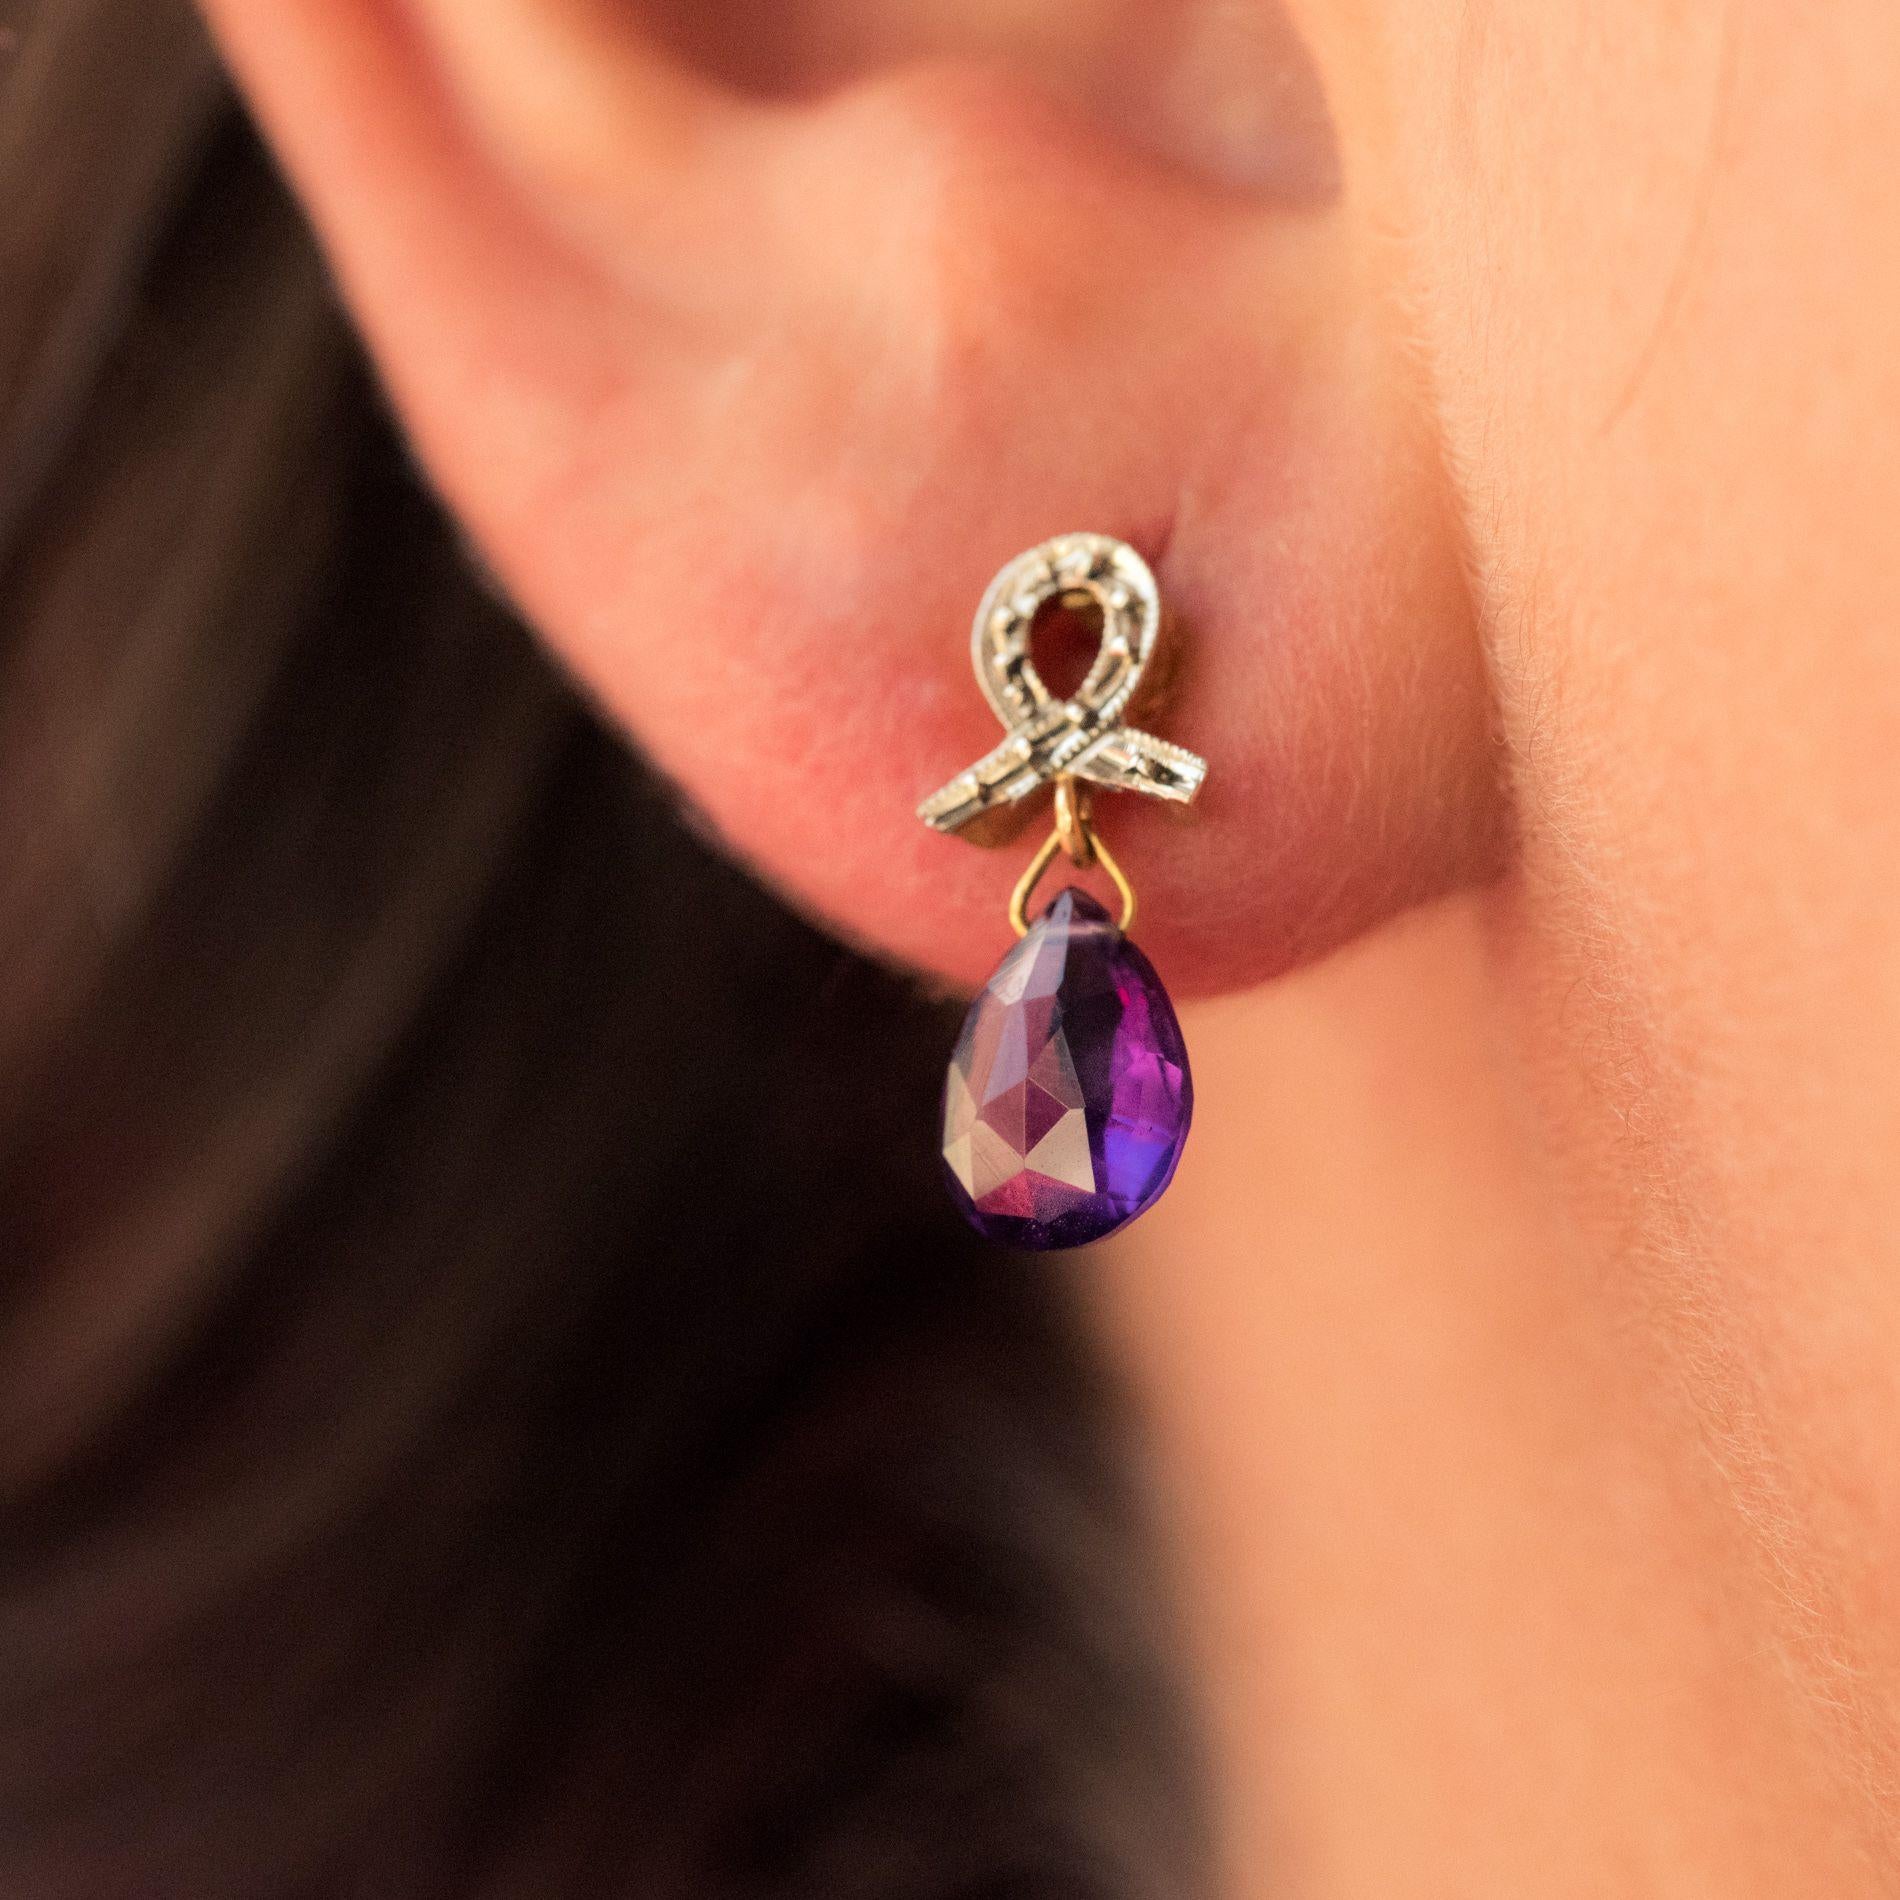 Creation Baume - Unique piece.
For pierced ears.
Earrings in 18 carats yellow gold.
These lovely gold earrings are made of a knot motif emgraved on white gold which holds an amethyst cut in briolette. The clasp is an alpa system.
Height: 1.6 cm,